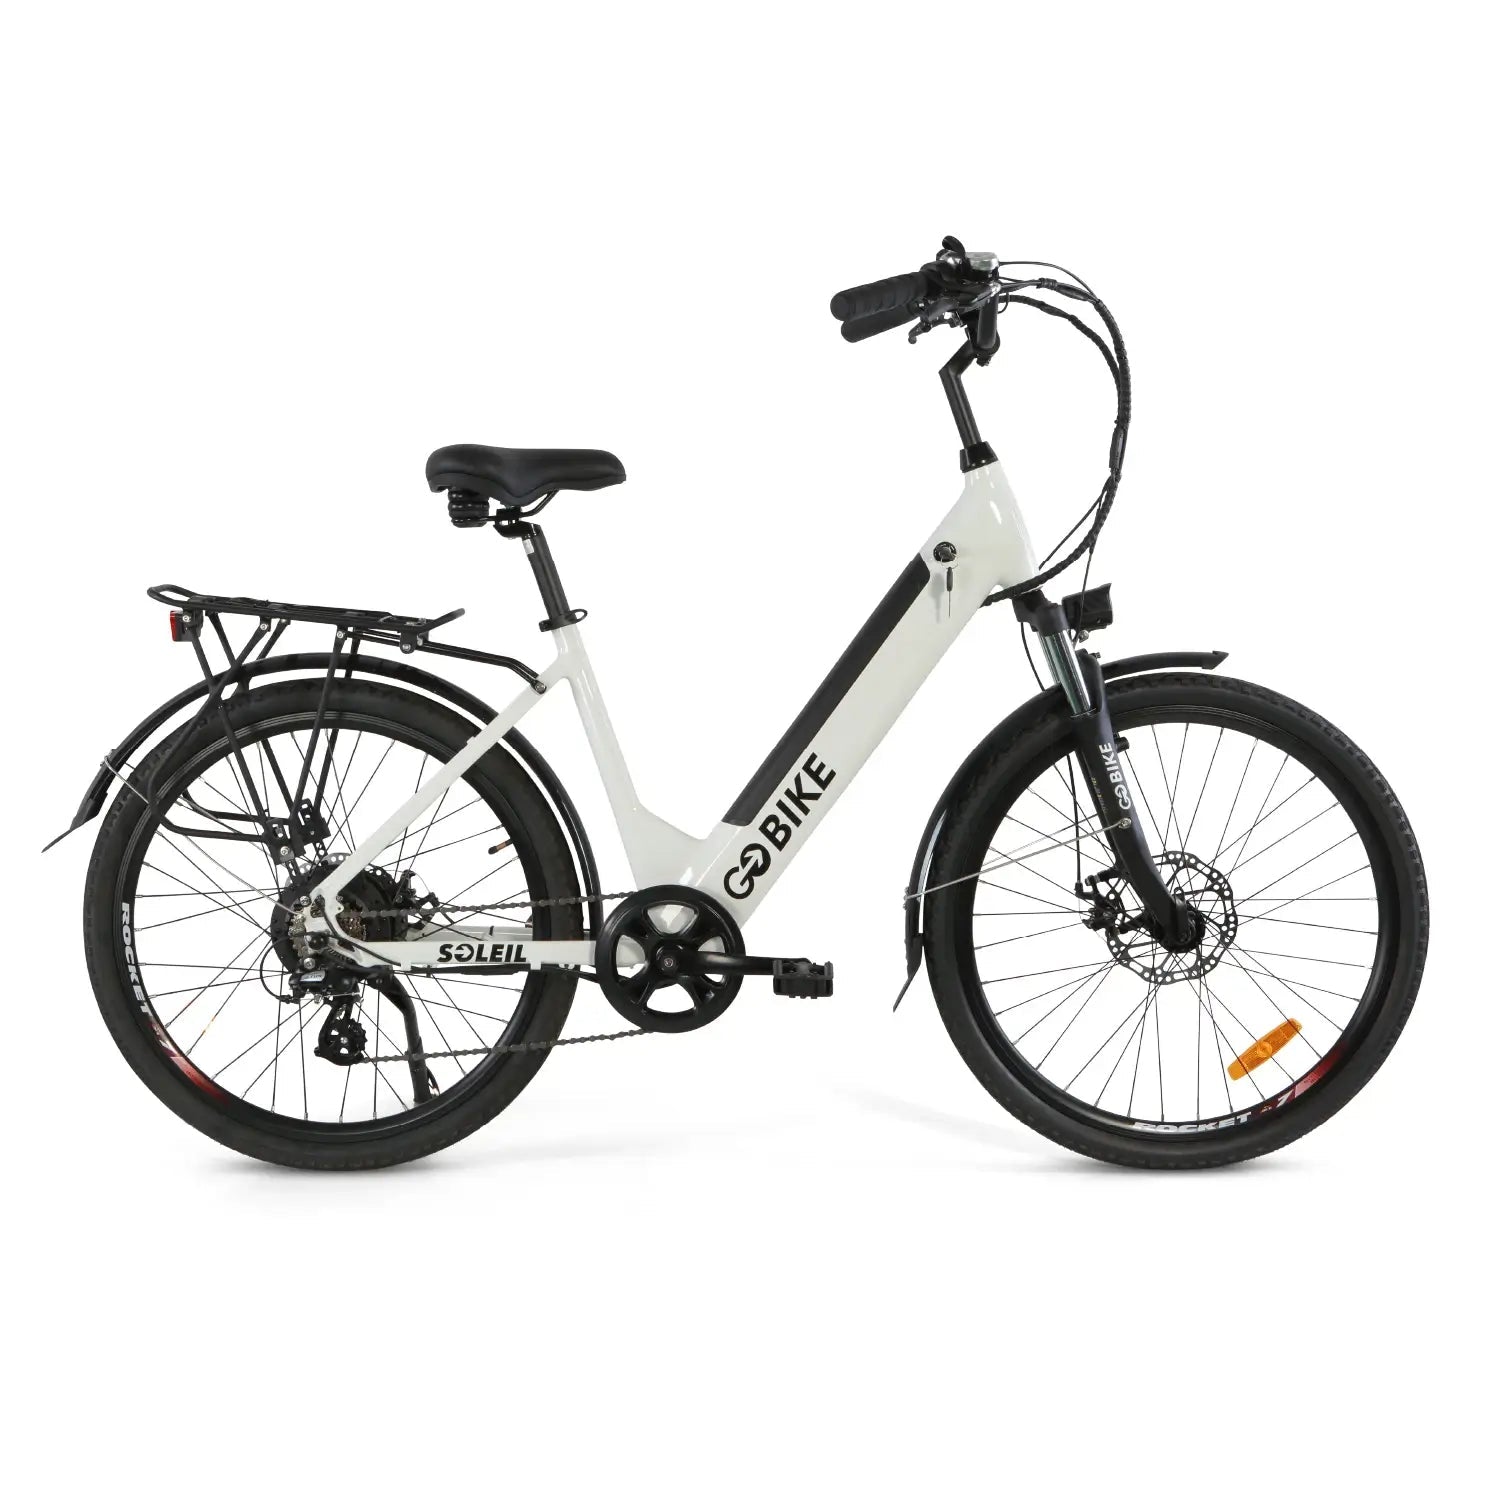 GOBIKE SOLEIL Electric City Bike-My Perfect Scooter